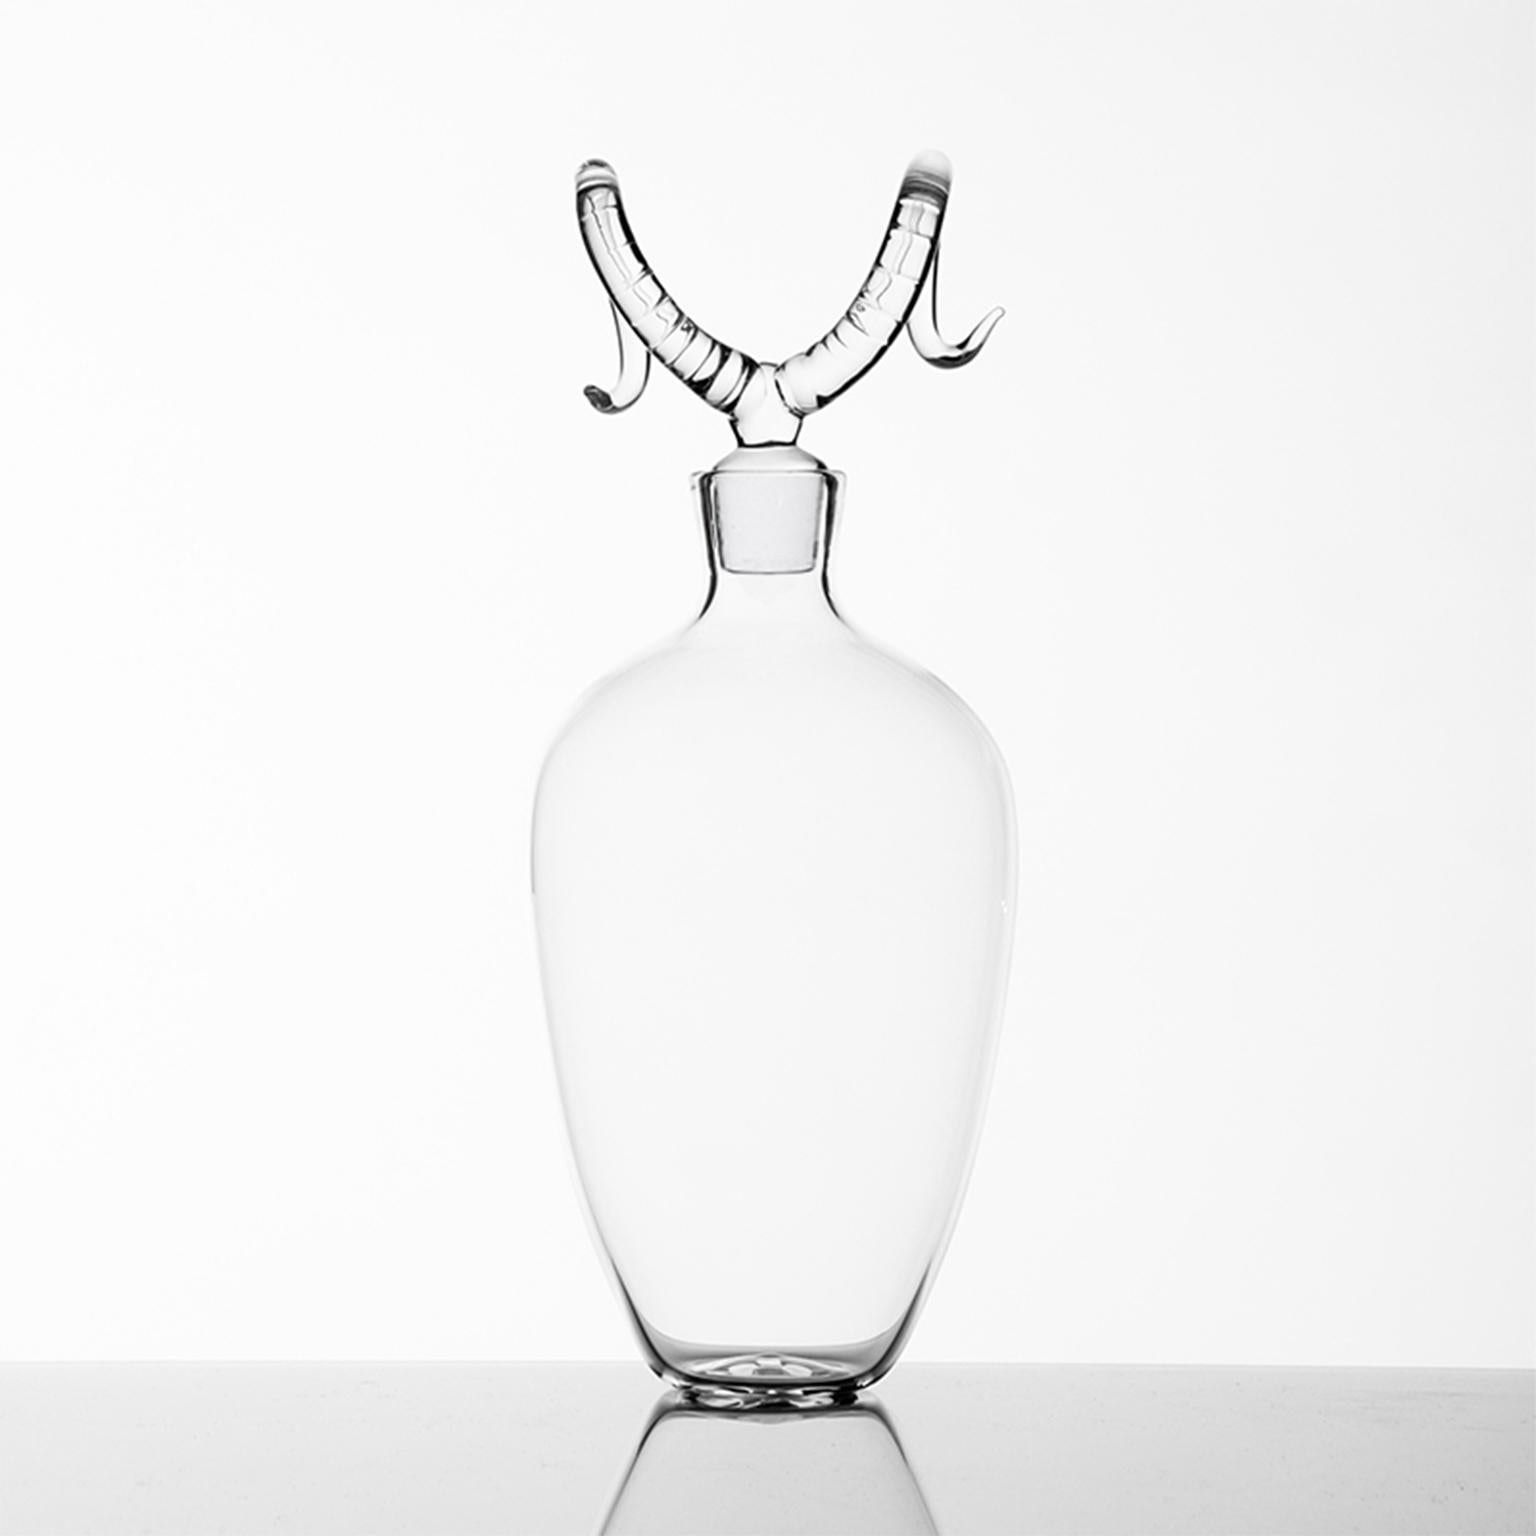 'Bighorn Bottle'
A Hand Blown Glass Bottle by Simone Crestani
Bighorn Bottle is one of the pieces from the Trophy Bottles.

AA collection of bottles with linear shapes that reserve a surprise at the top. Elk, antelope, deer or buffalo? Each trophy